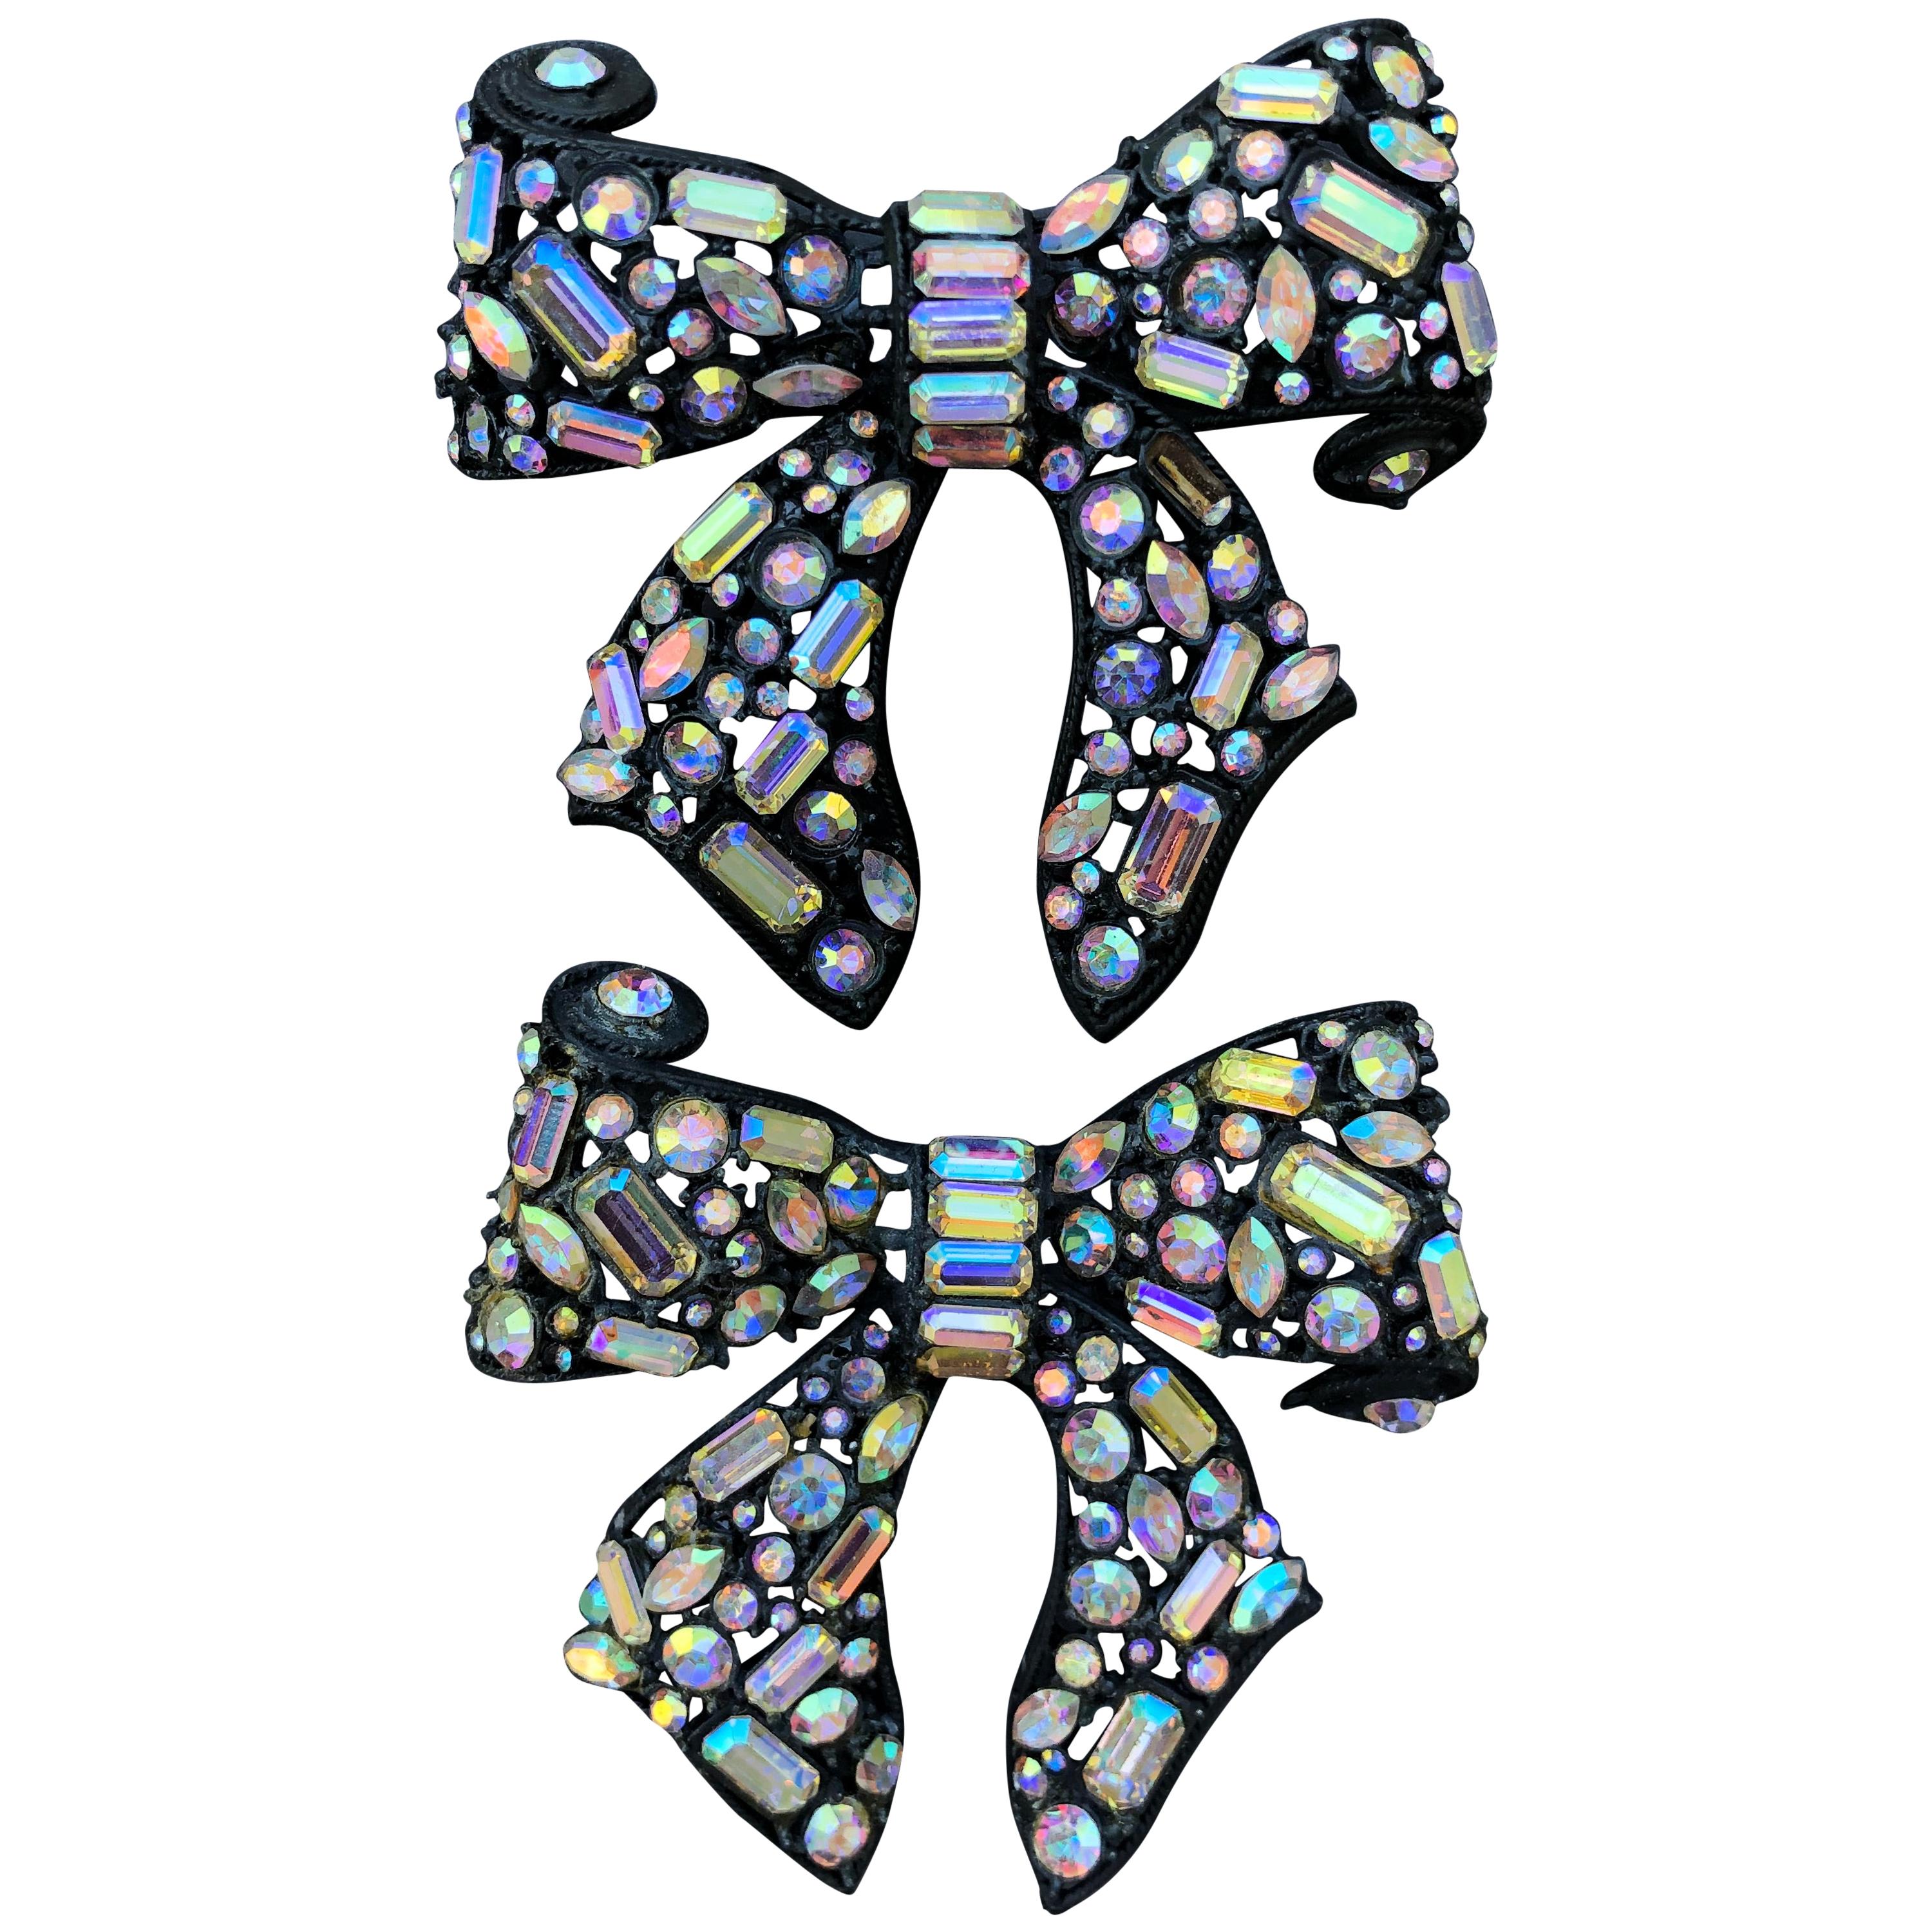 R. Serbin 1980's Pair of Runway Large Crystal A.B. Bow Pin's  For Sale